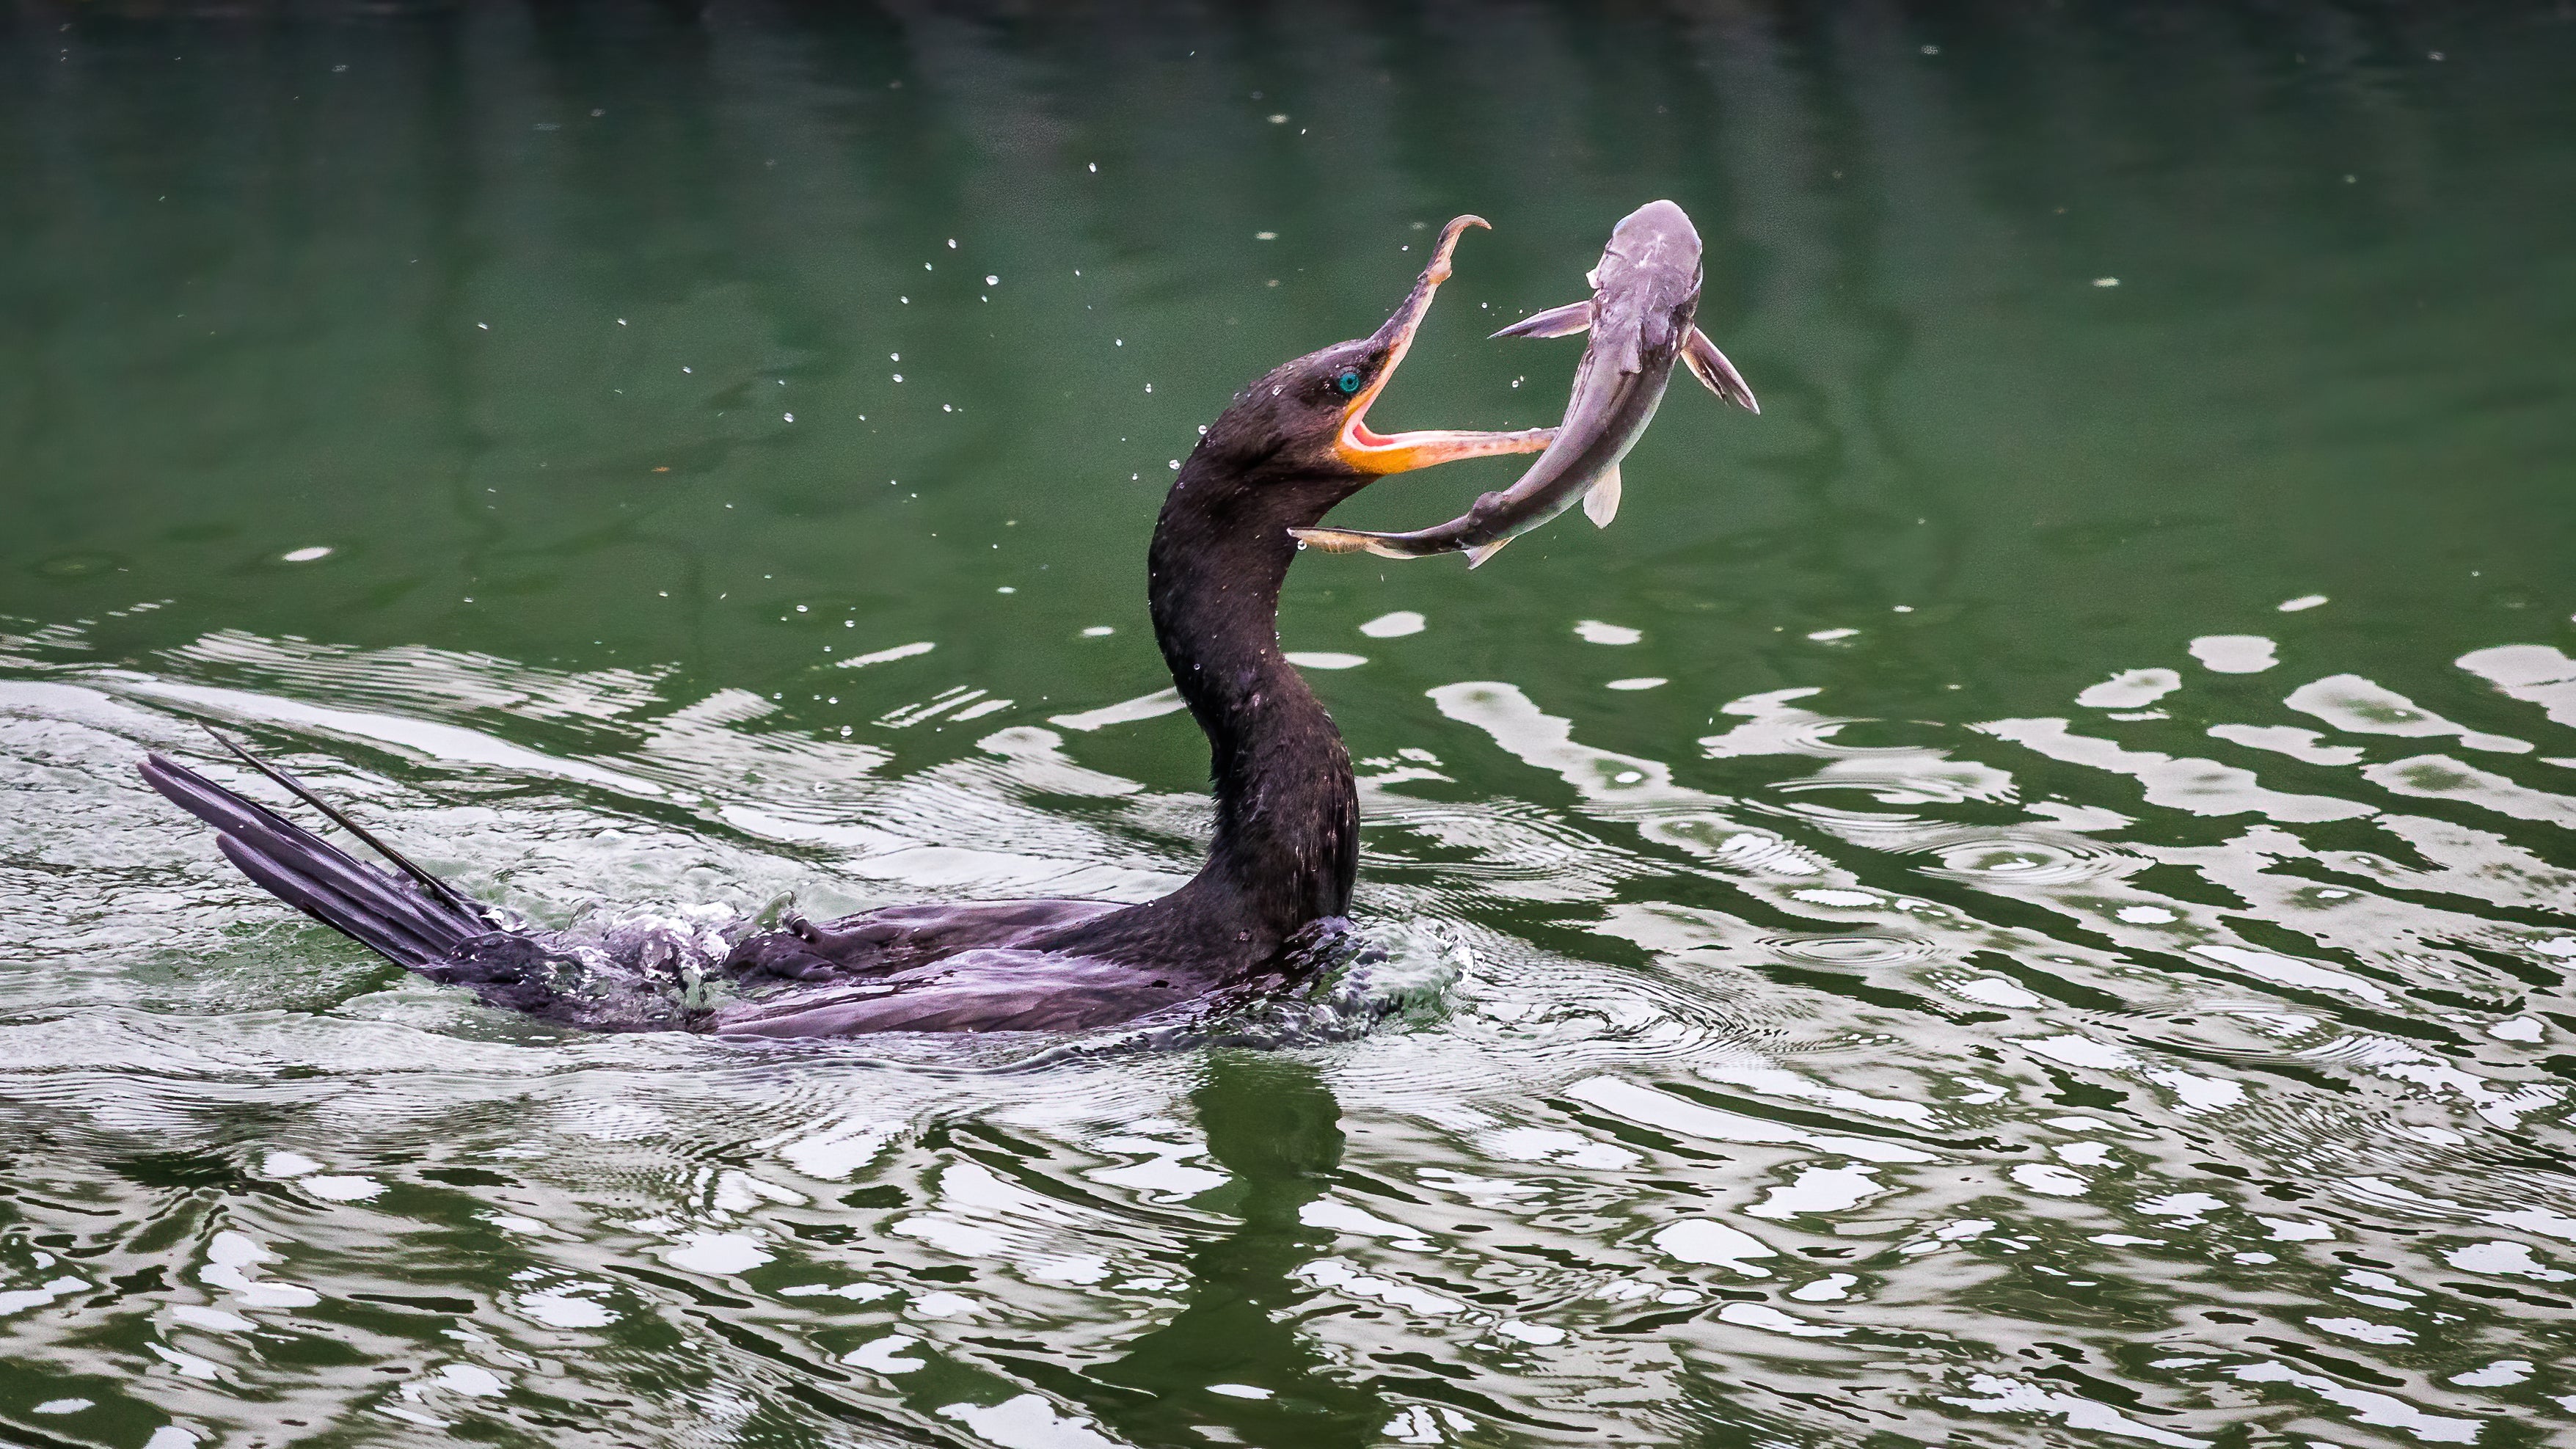 Browse Free HD Images of Bird Catches Fish In Its Beak While